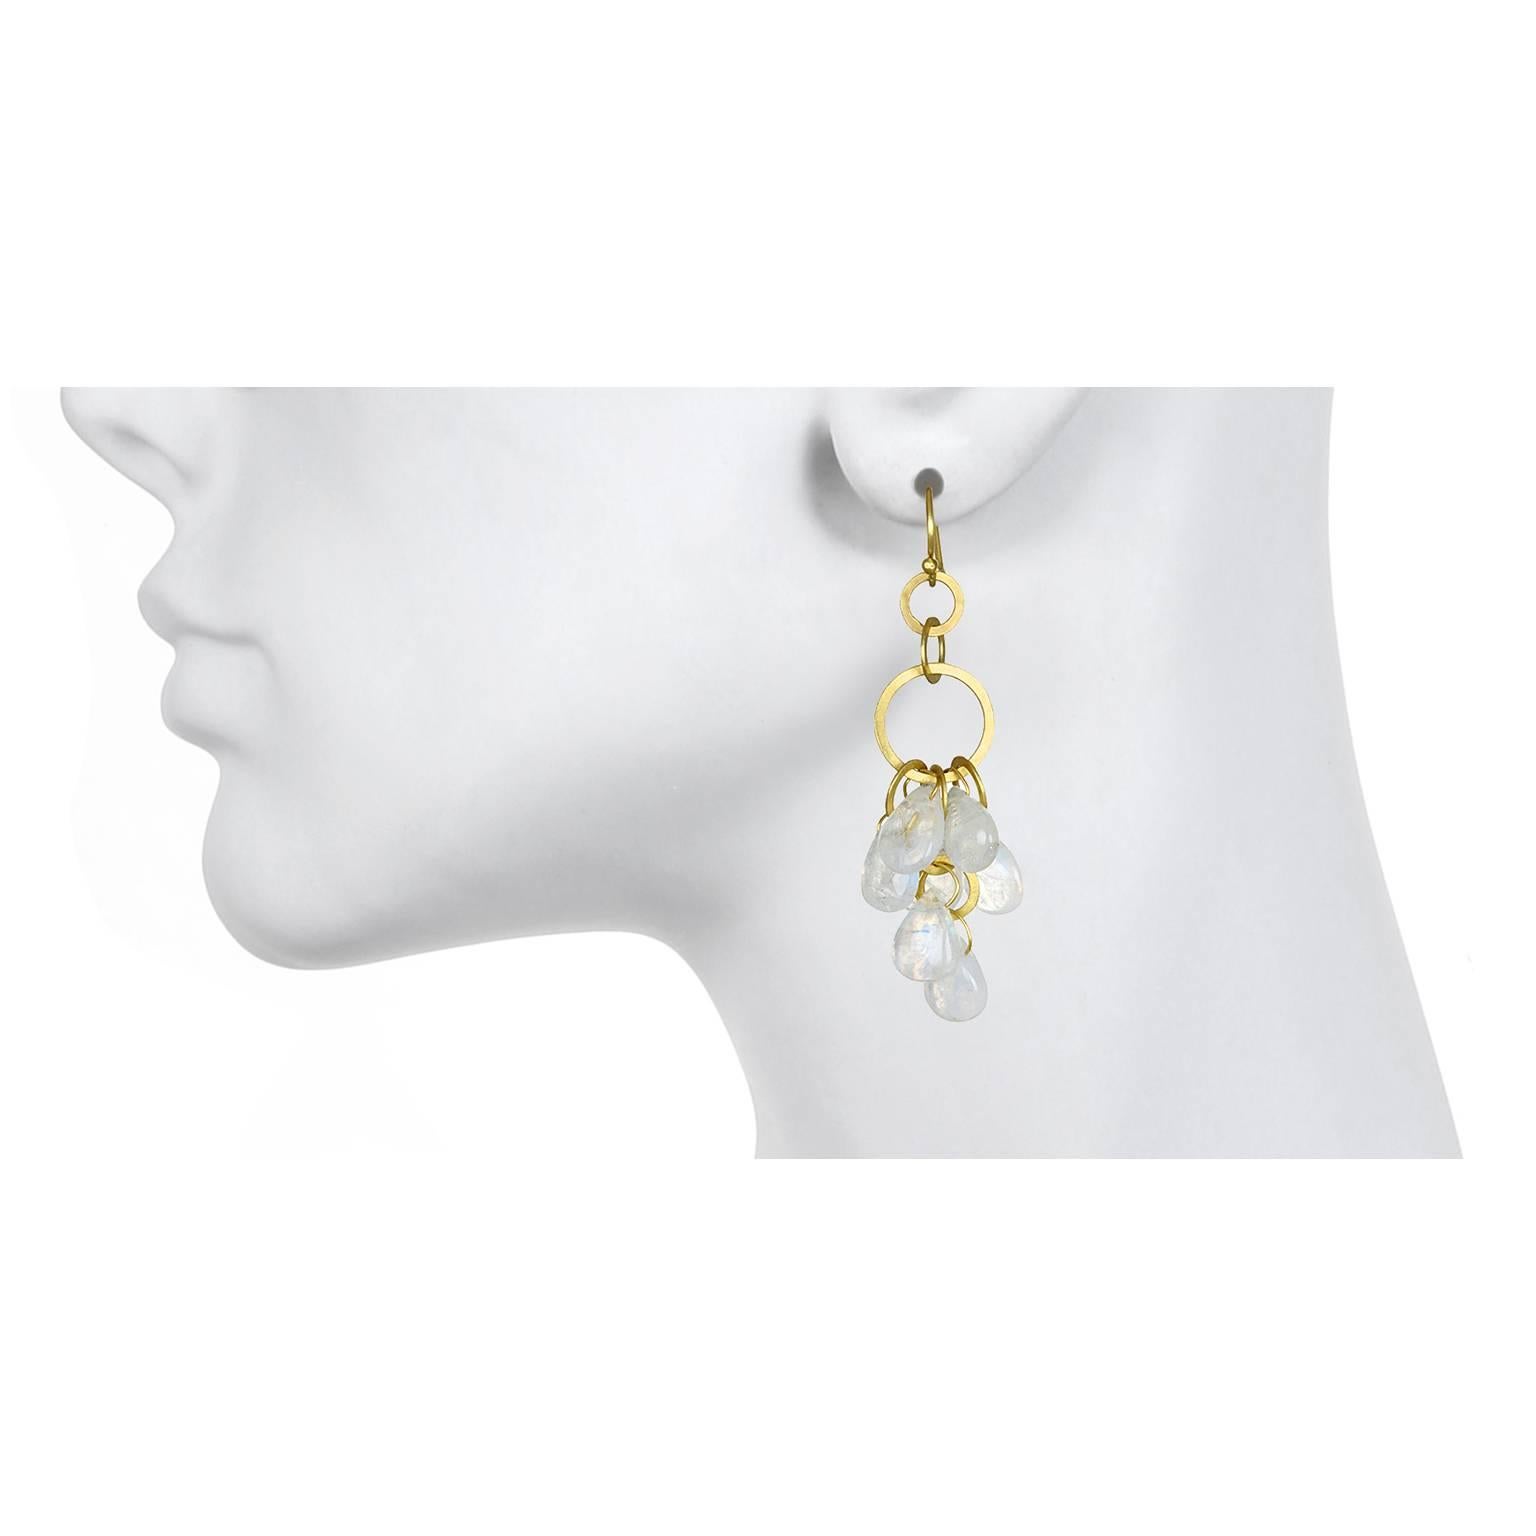 A perennial favorite, Faye Kim's earrings in 18 karat gold are handmade with shimmering moonstone briolettes.  Fun and versatile, moonstones are easy to pair with other colors and can easily go from day to evening. French ear wires. Matte